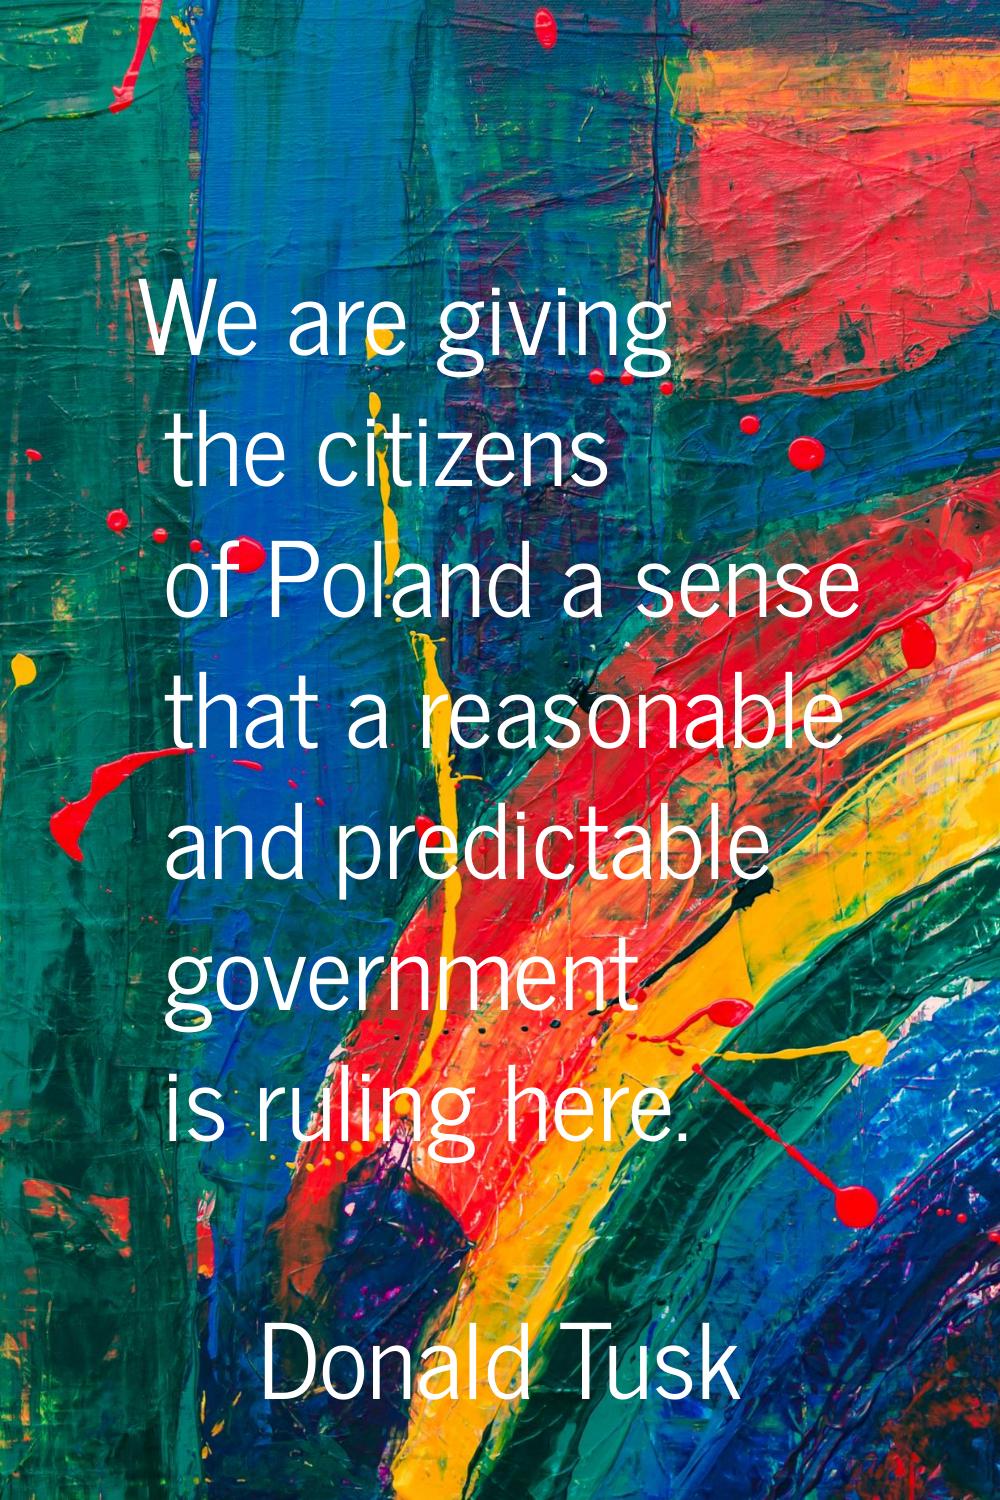 We are giving the citizens of Poland a sense that a reasonable and predictable government is ruling